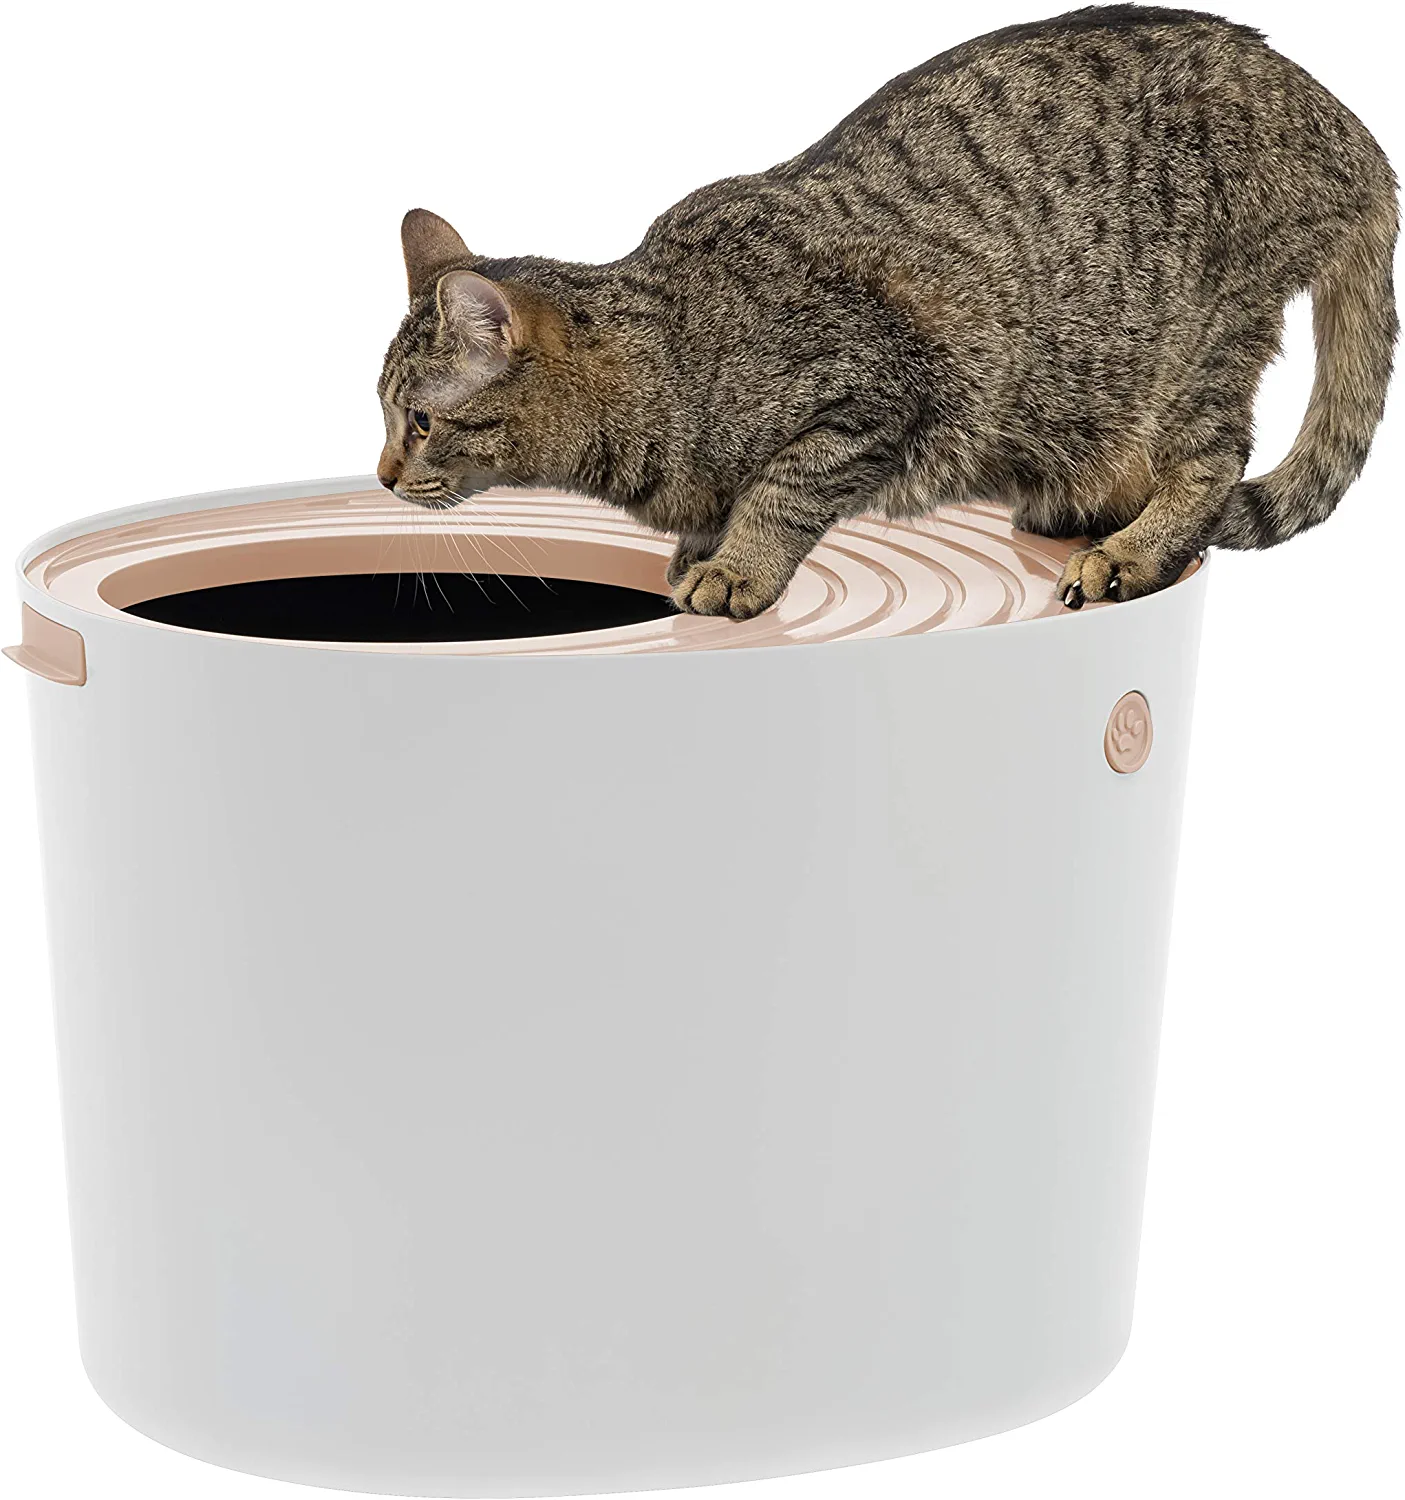 Cat hovering over fancy litter box controls odor